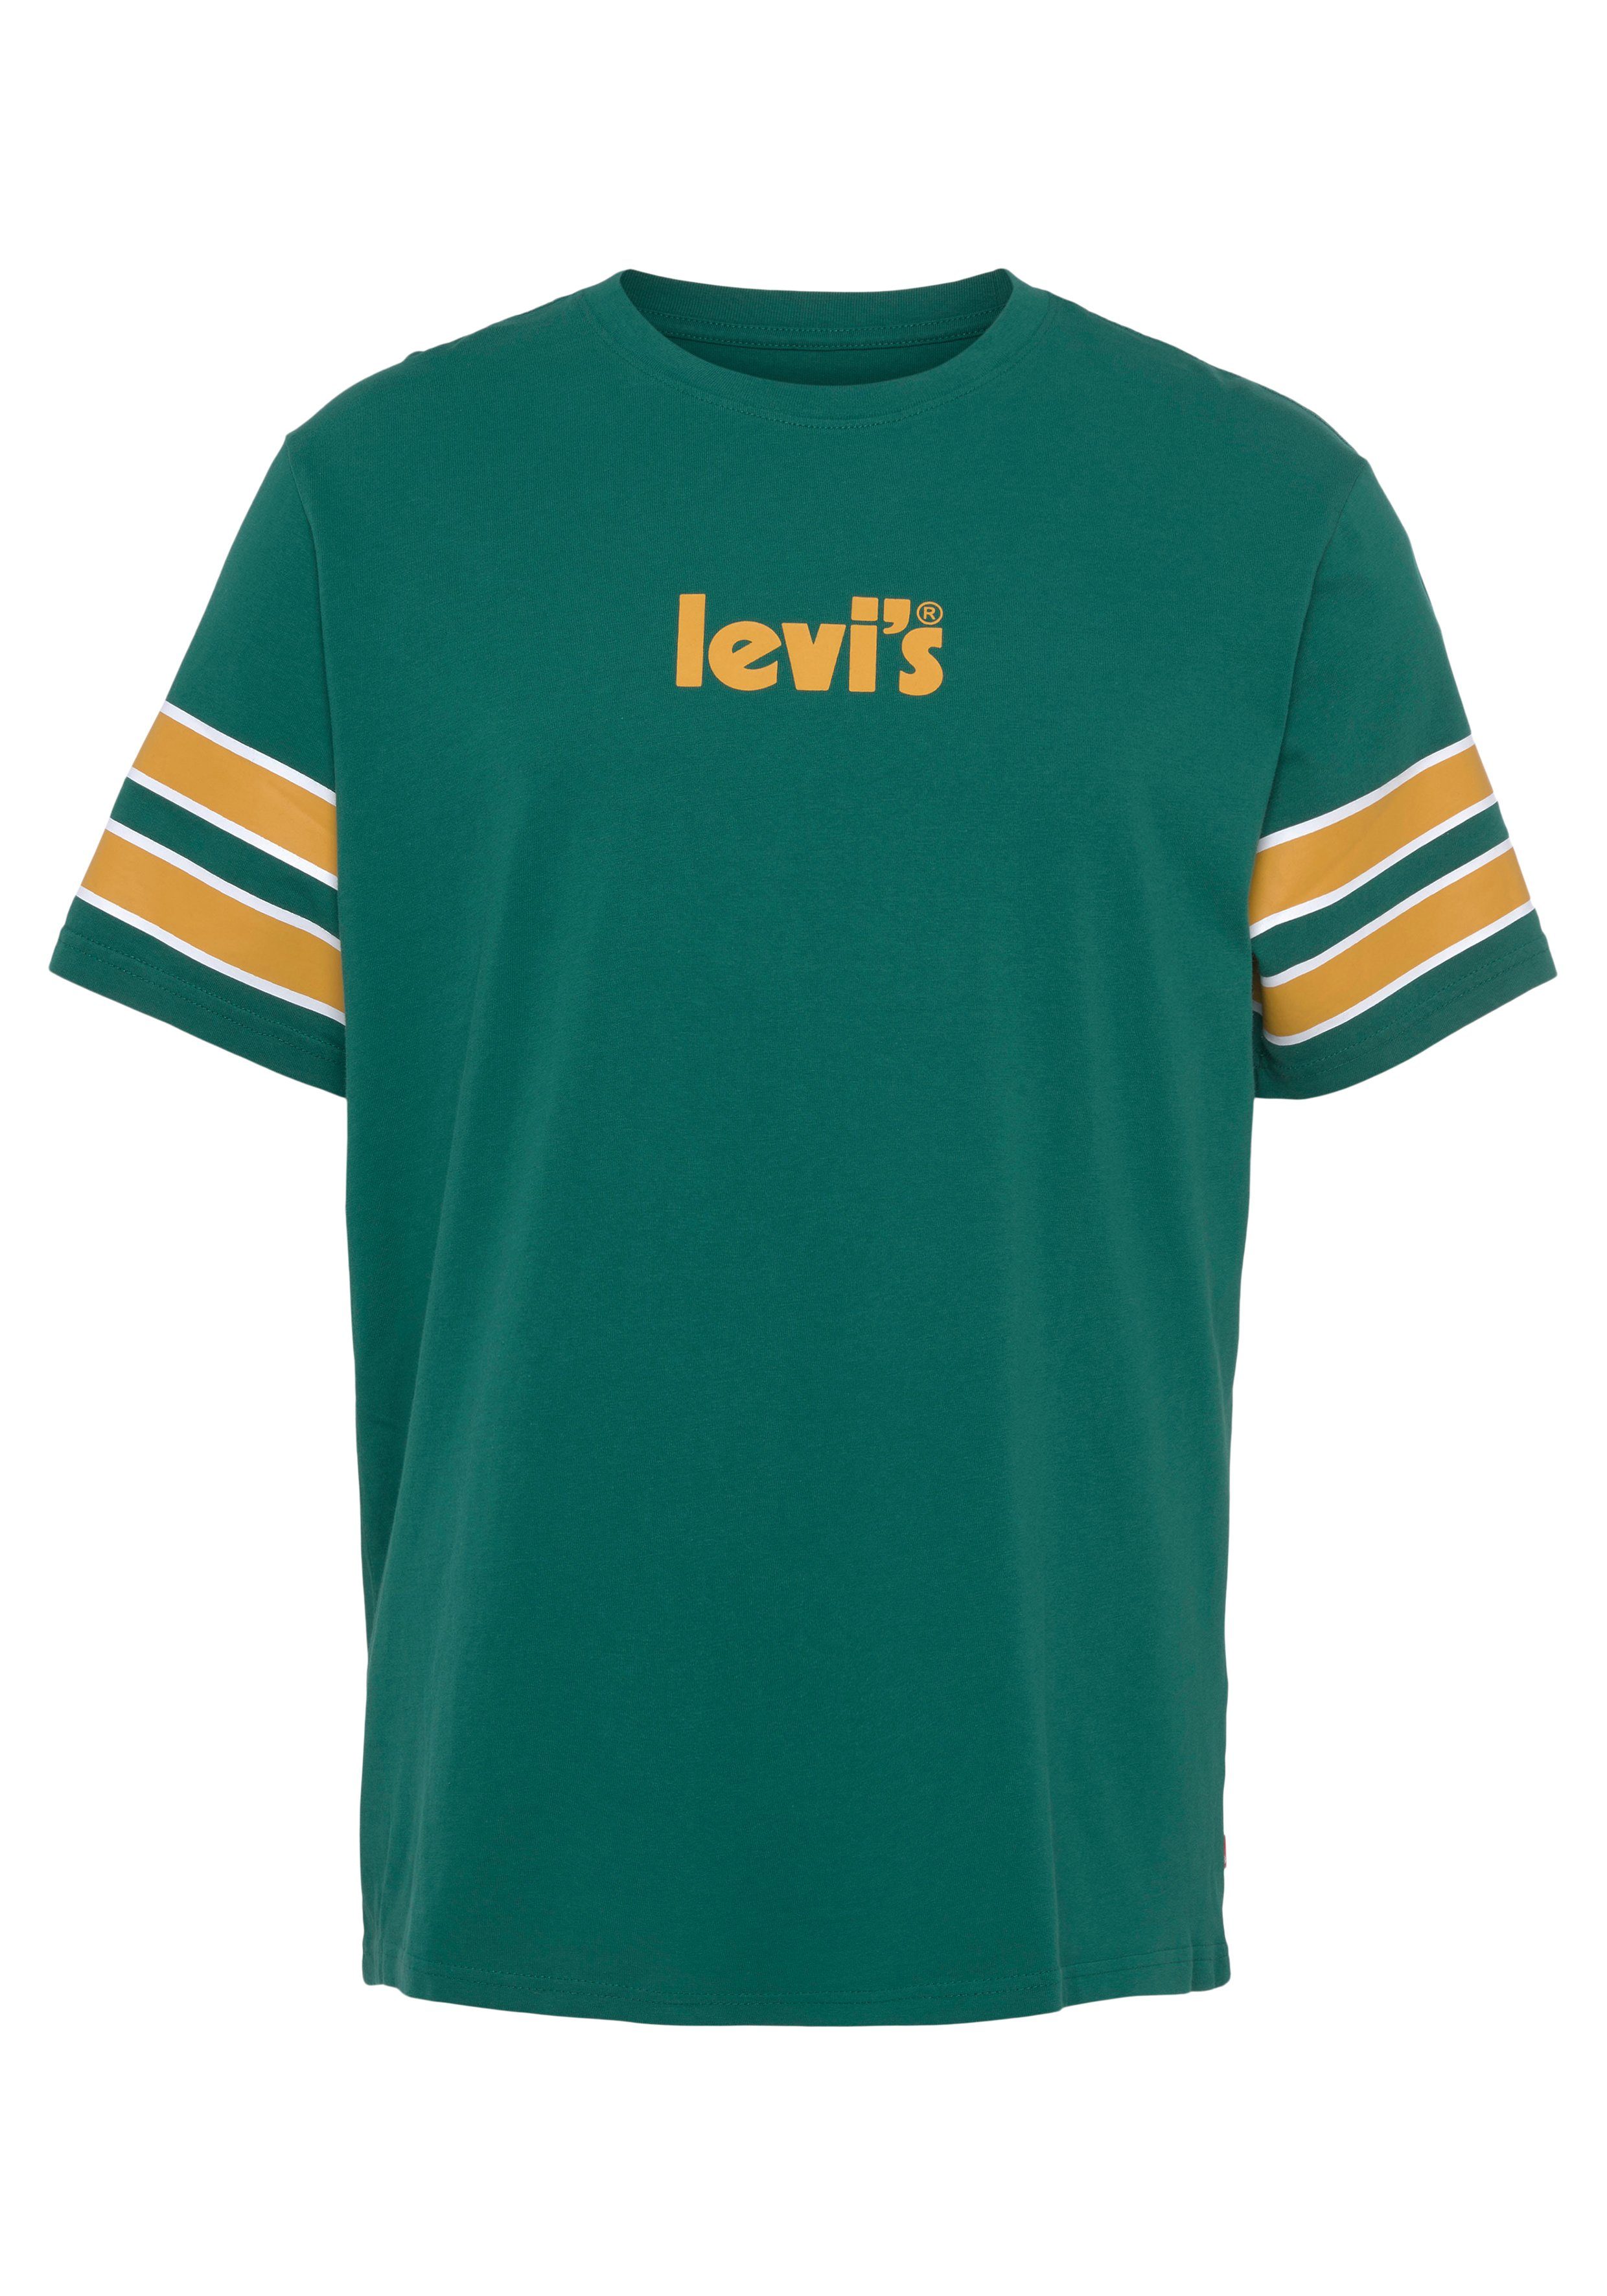 Rundhalsshirt FIT greens TEE im Levi's® RELAXED College-Look